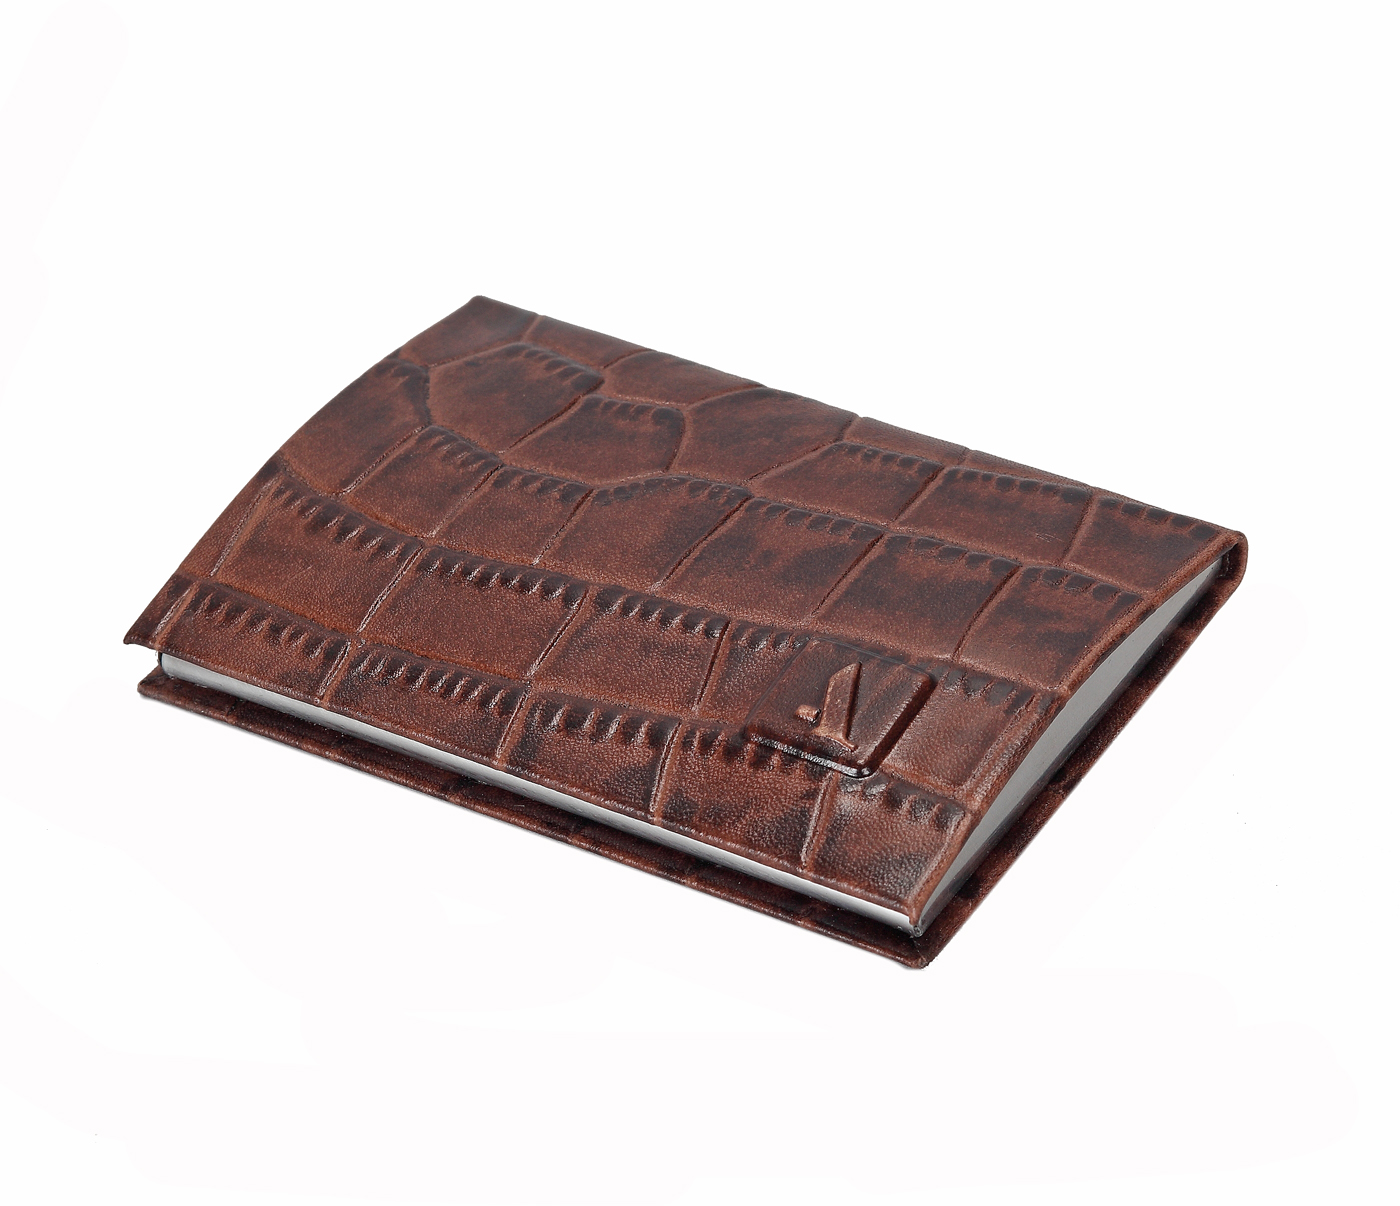 W170--Metal Body Credit, Visting Card Case Bounded In Genuine Leather - Brown.